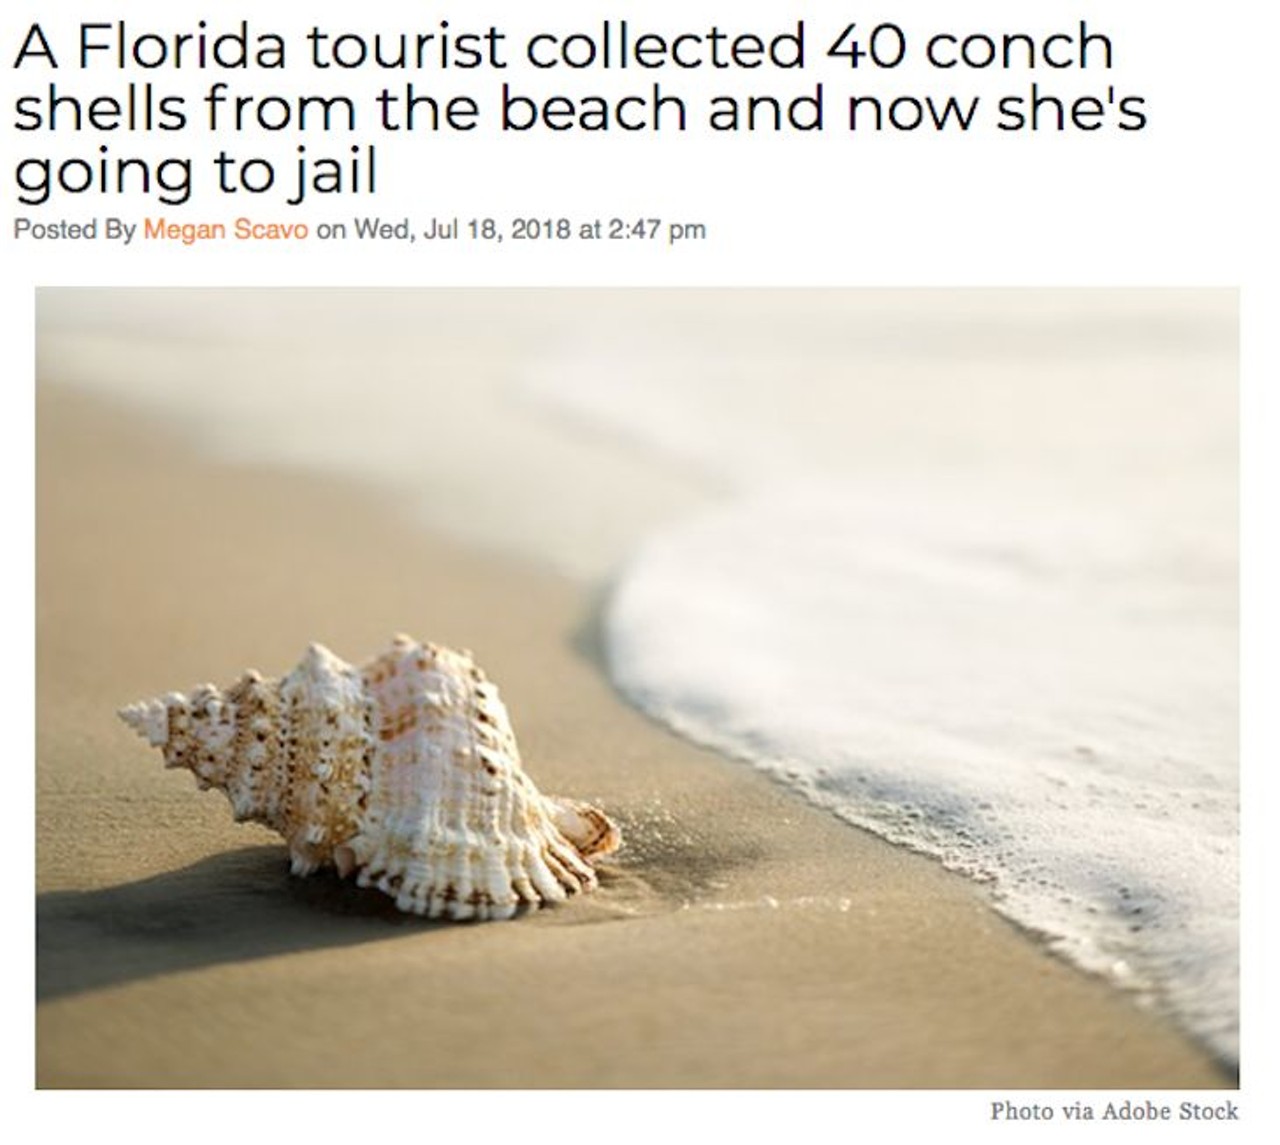 A Texas woman visiting Key West will serve 15 days in jail after collecting 40 conch shells that she planned to give away as gifts. Read more here.